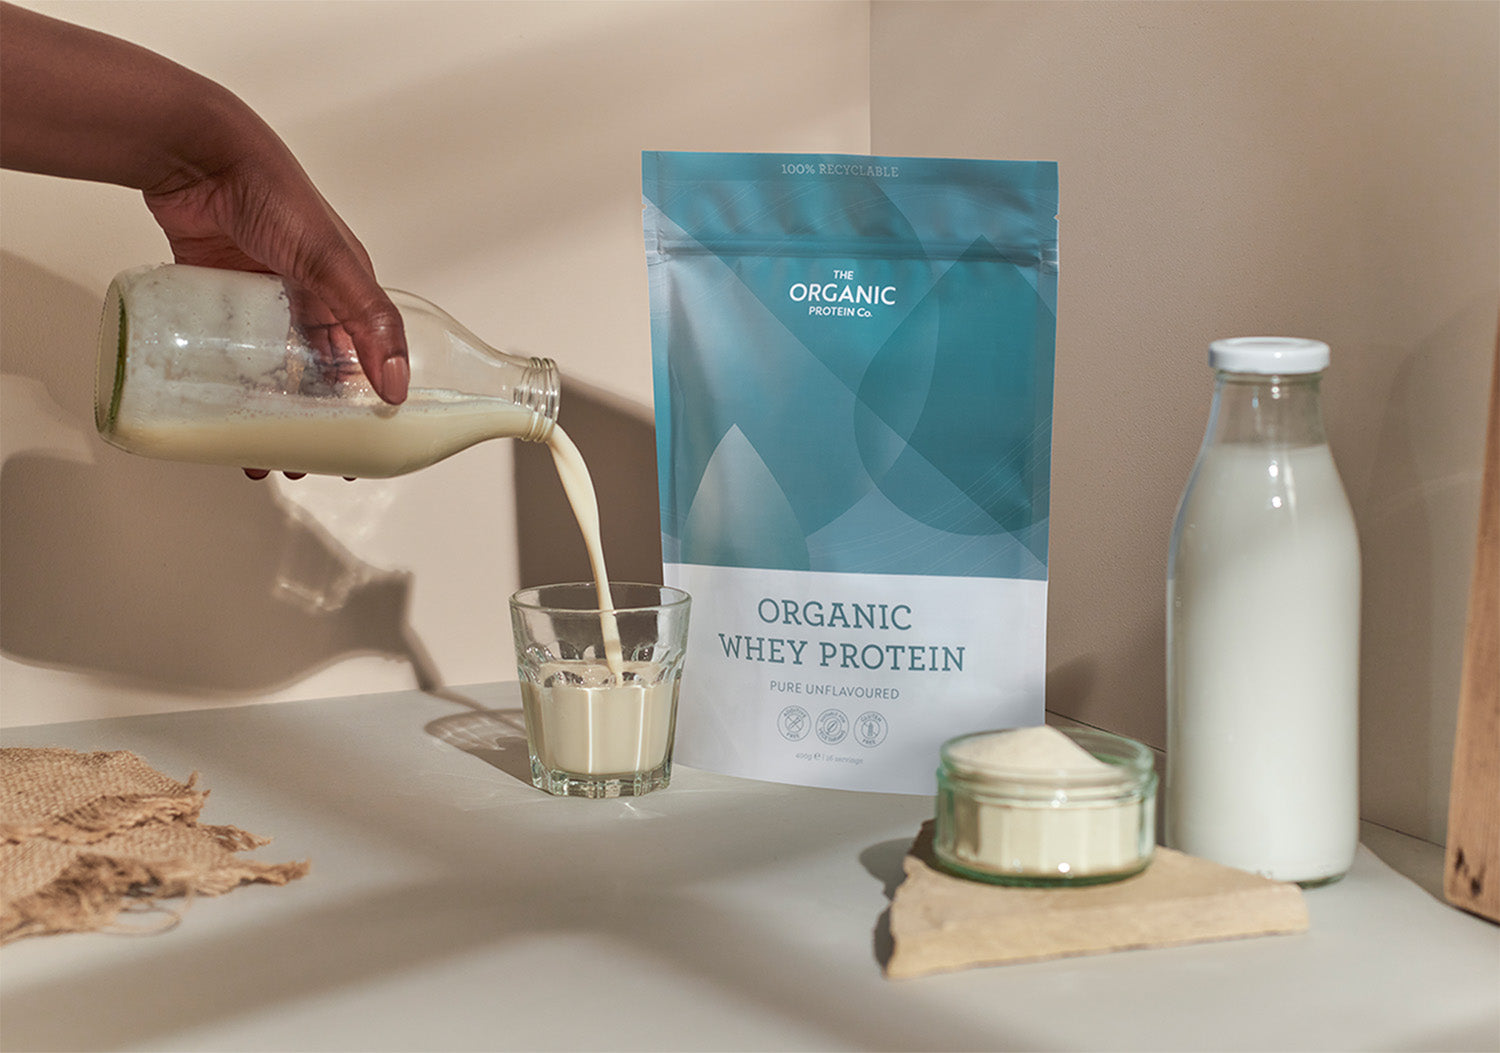 The role of organic whey protein powder in your weight management journey